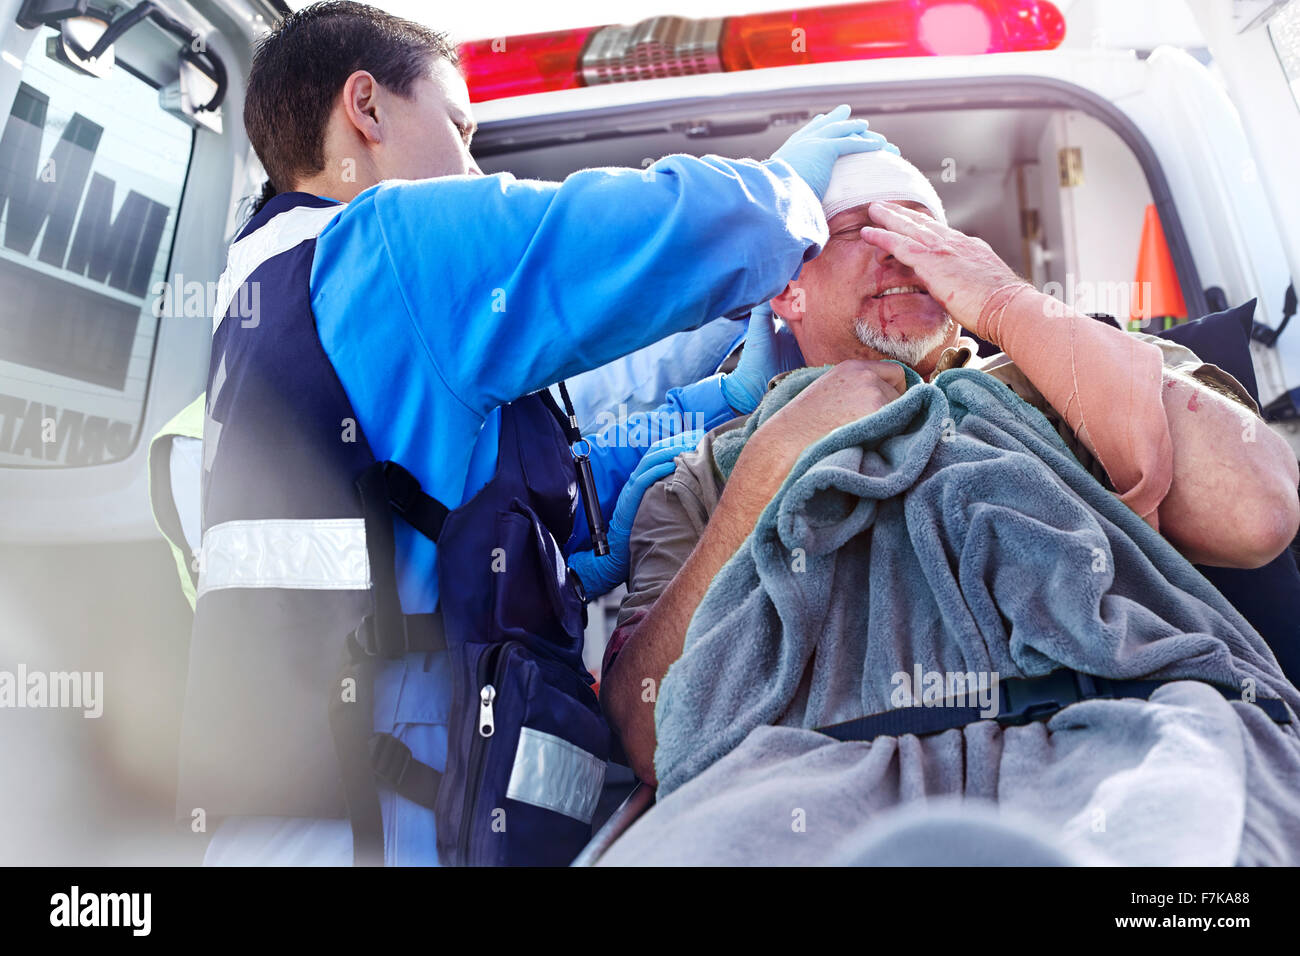 Rescue worker tending to patient at back of ambulance Stock Photo